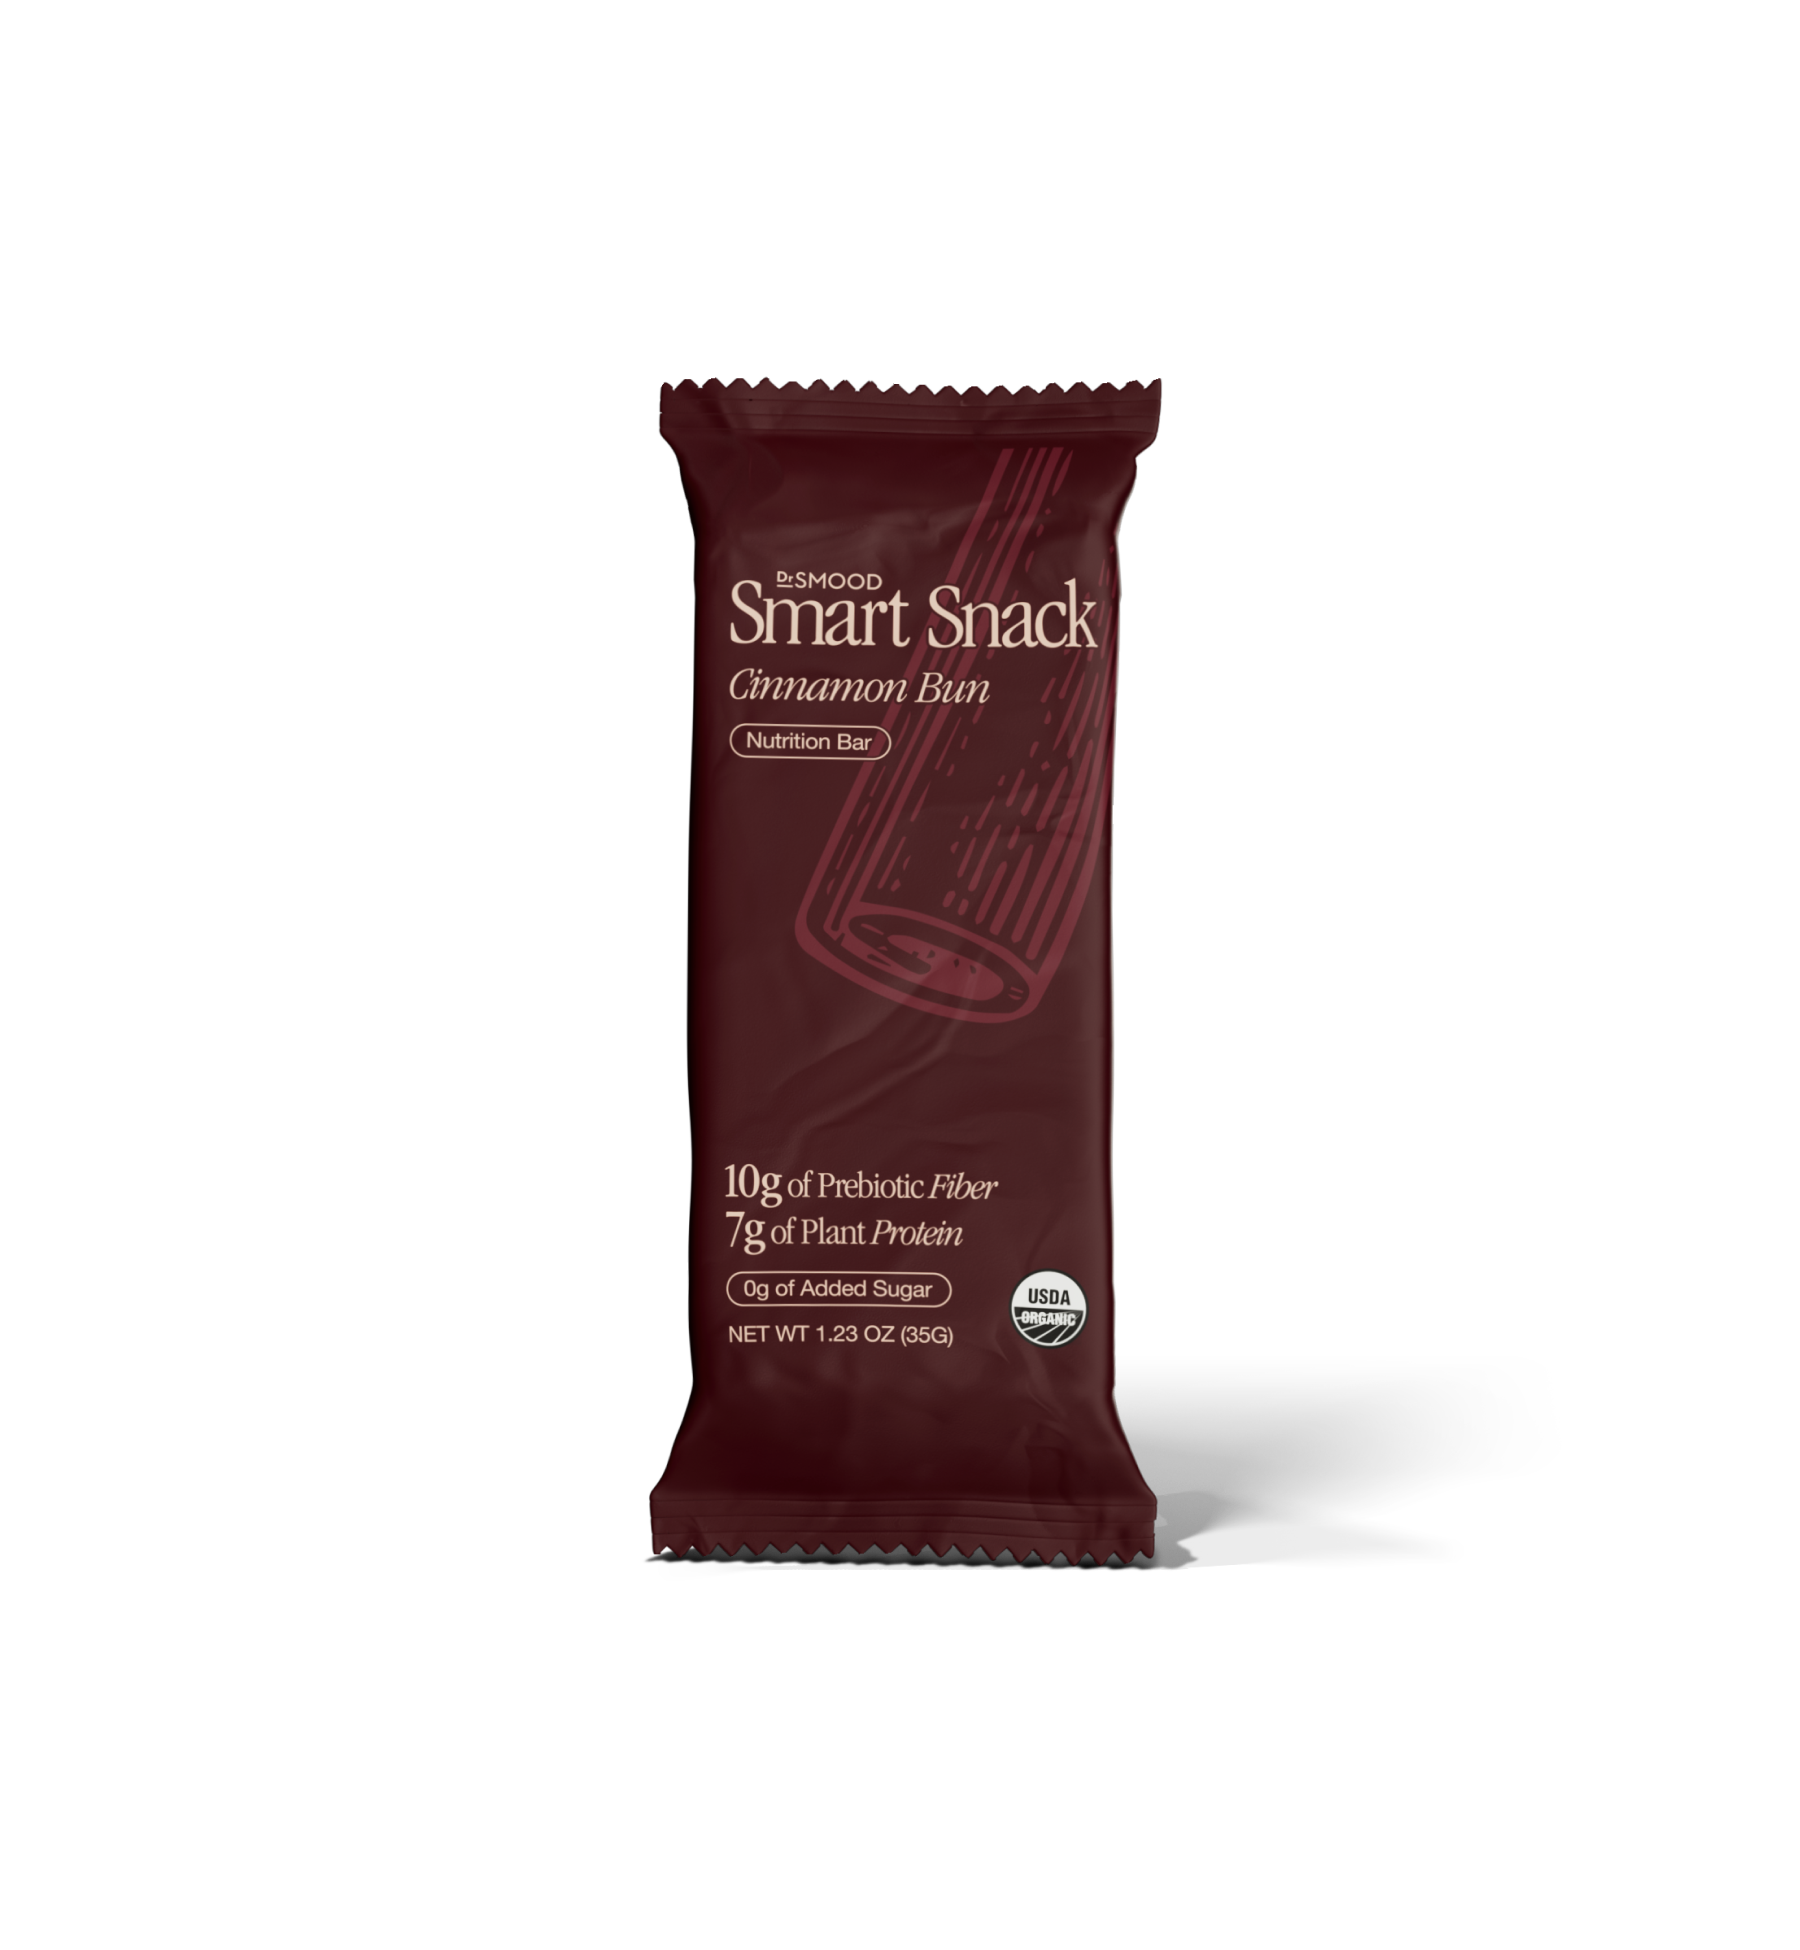 A Dr. Smood Smart Snack Cinnamon Bun Nutrition Bar. The bar is wrapped in a dark red packaging with a minimalist design, featuring an illustration of a cinnamon stick. The packaging highlights key nutritional benefits, such as “10g of Prebiotic Fiber” and “7g of Plant Protein,” along with certifications like “USDA Organic.” The bar weighs 1.23 oz (35g).